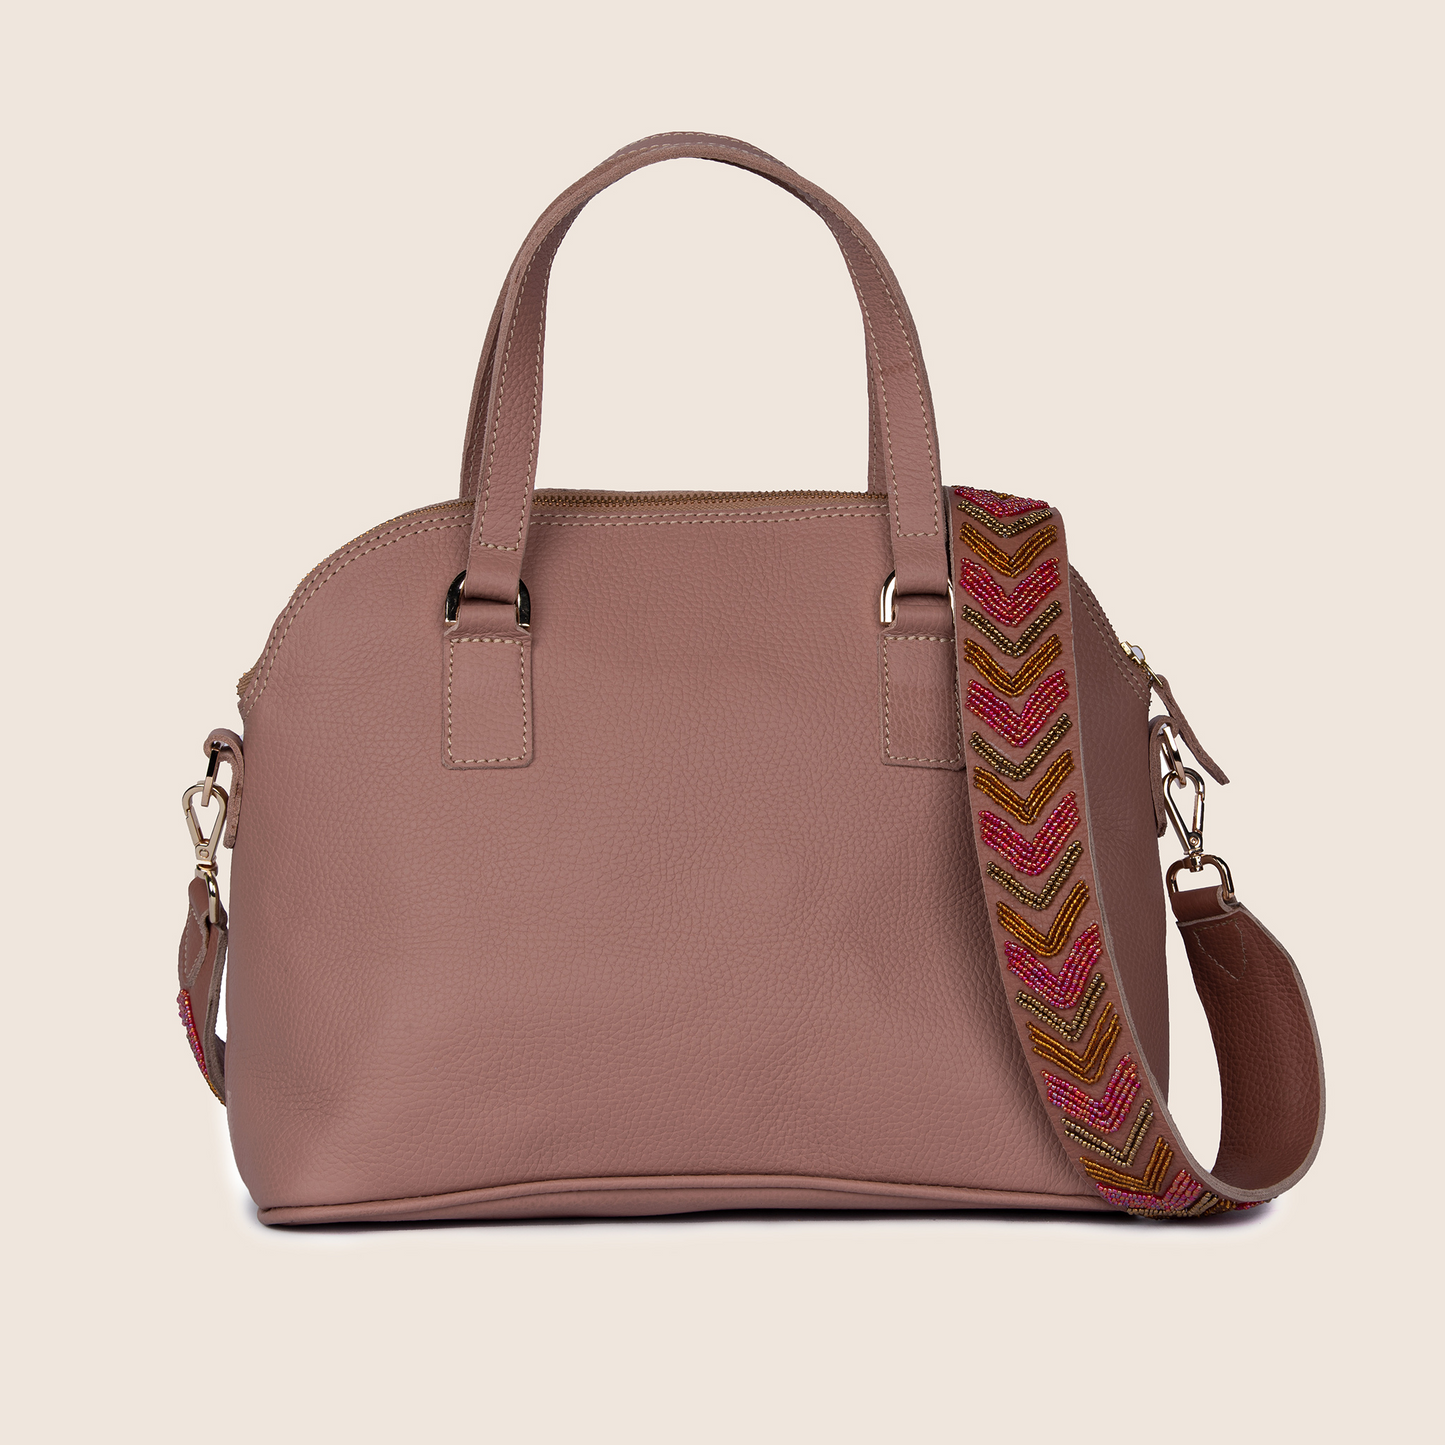 Spade bag in nude milled leather and with Maasai beaded adjustable shoulder strap